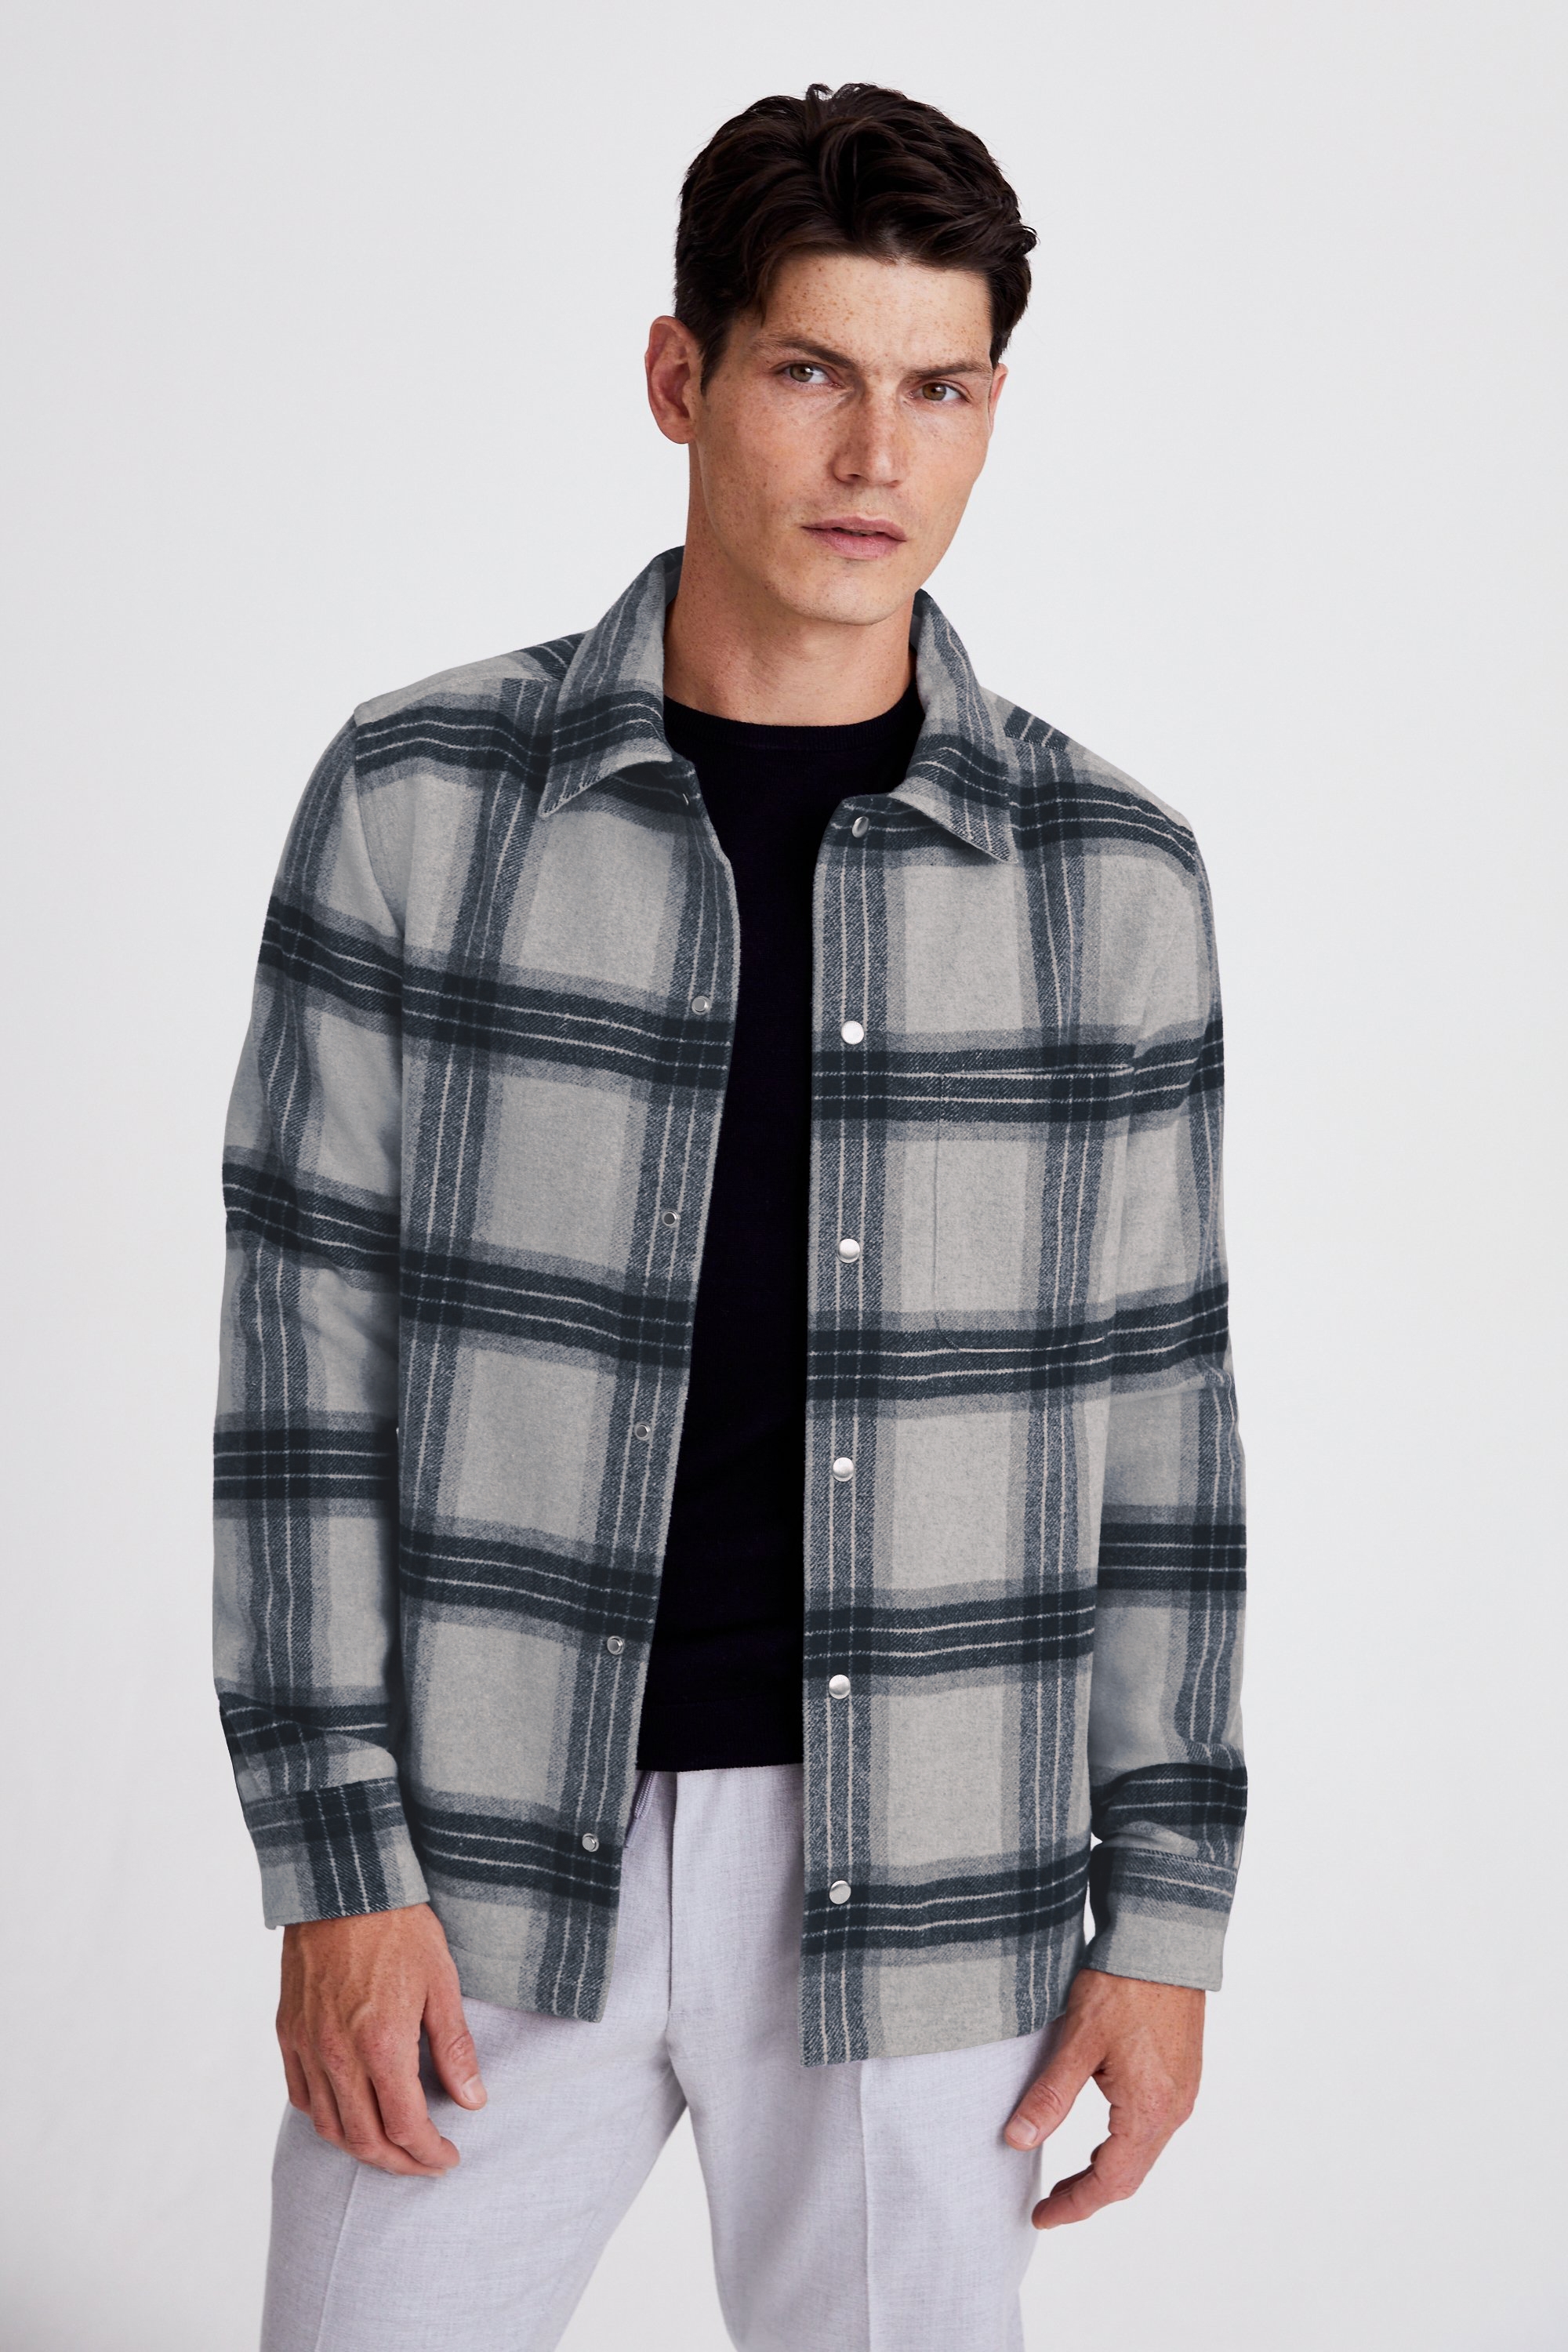 Tailored Fit Navy Check Overshirt | Buy Online at Moss